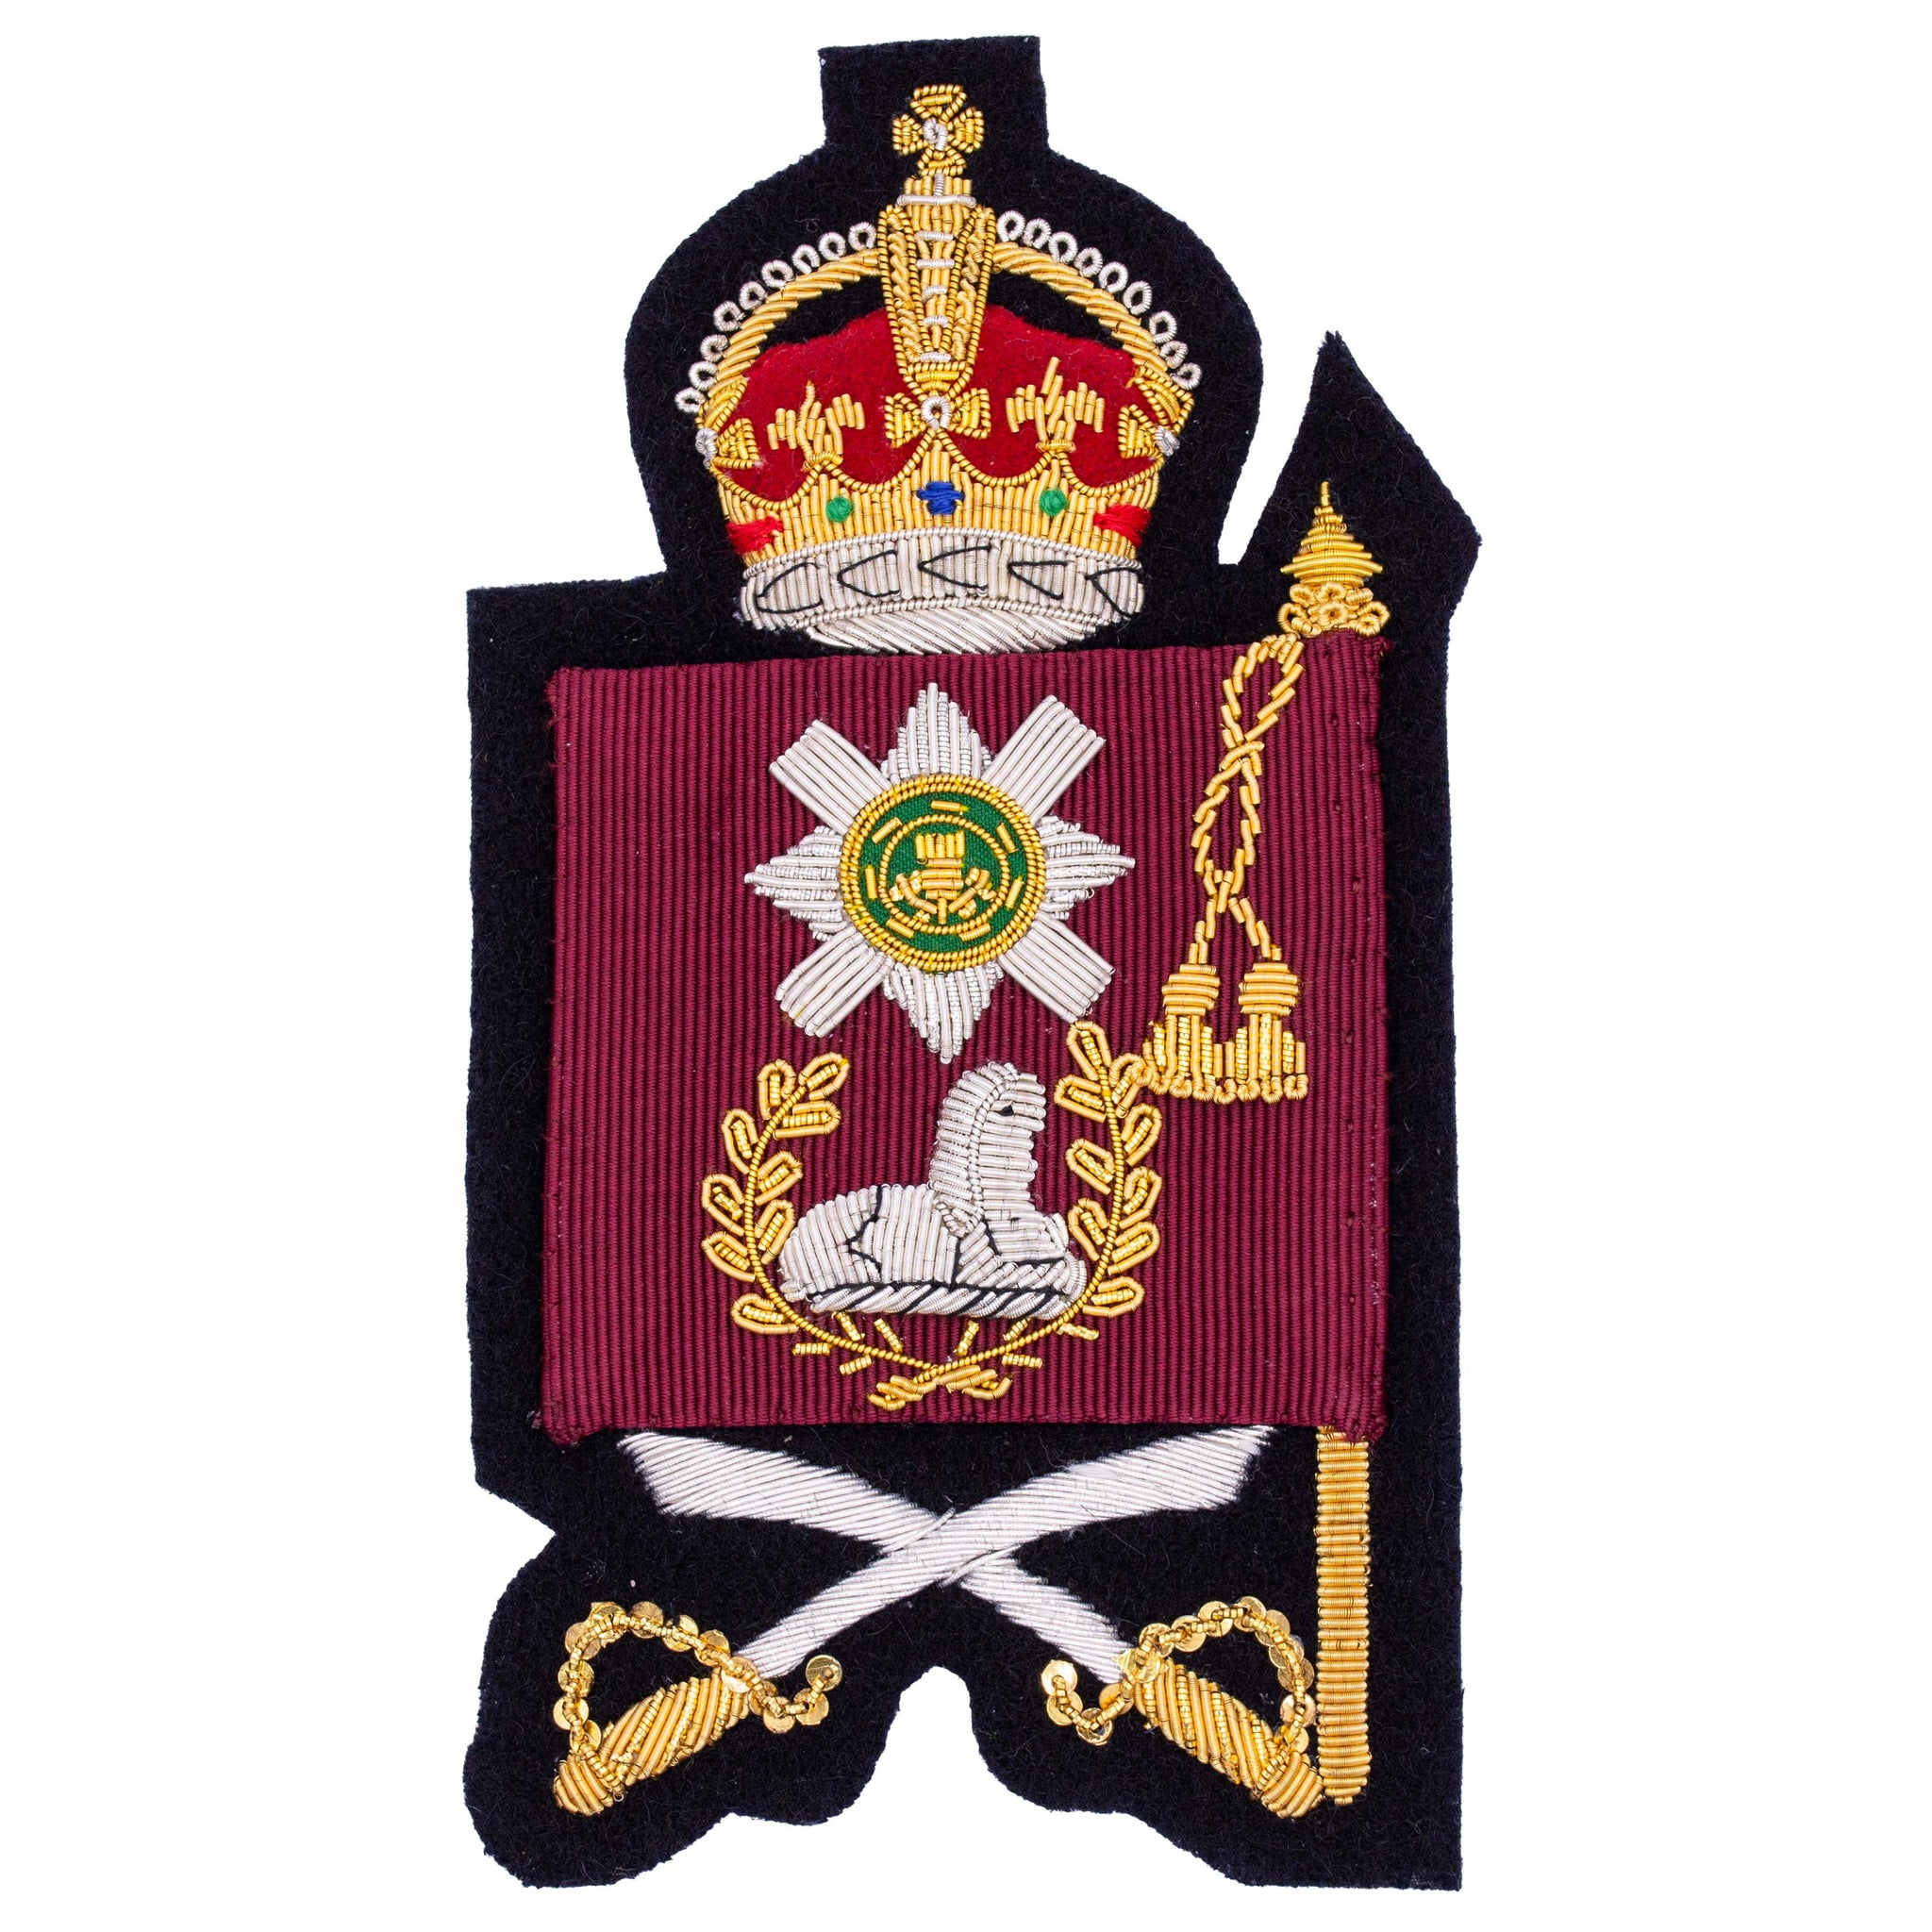 (King's Crown) Warrant Officer Class 2 NCO Colour Sergeants and Company Quartermaster Sergeants Rank Household Division Scots Guards British Army Badge